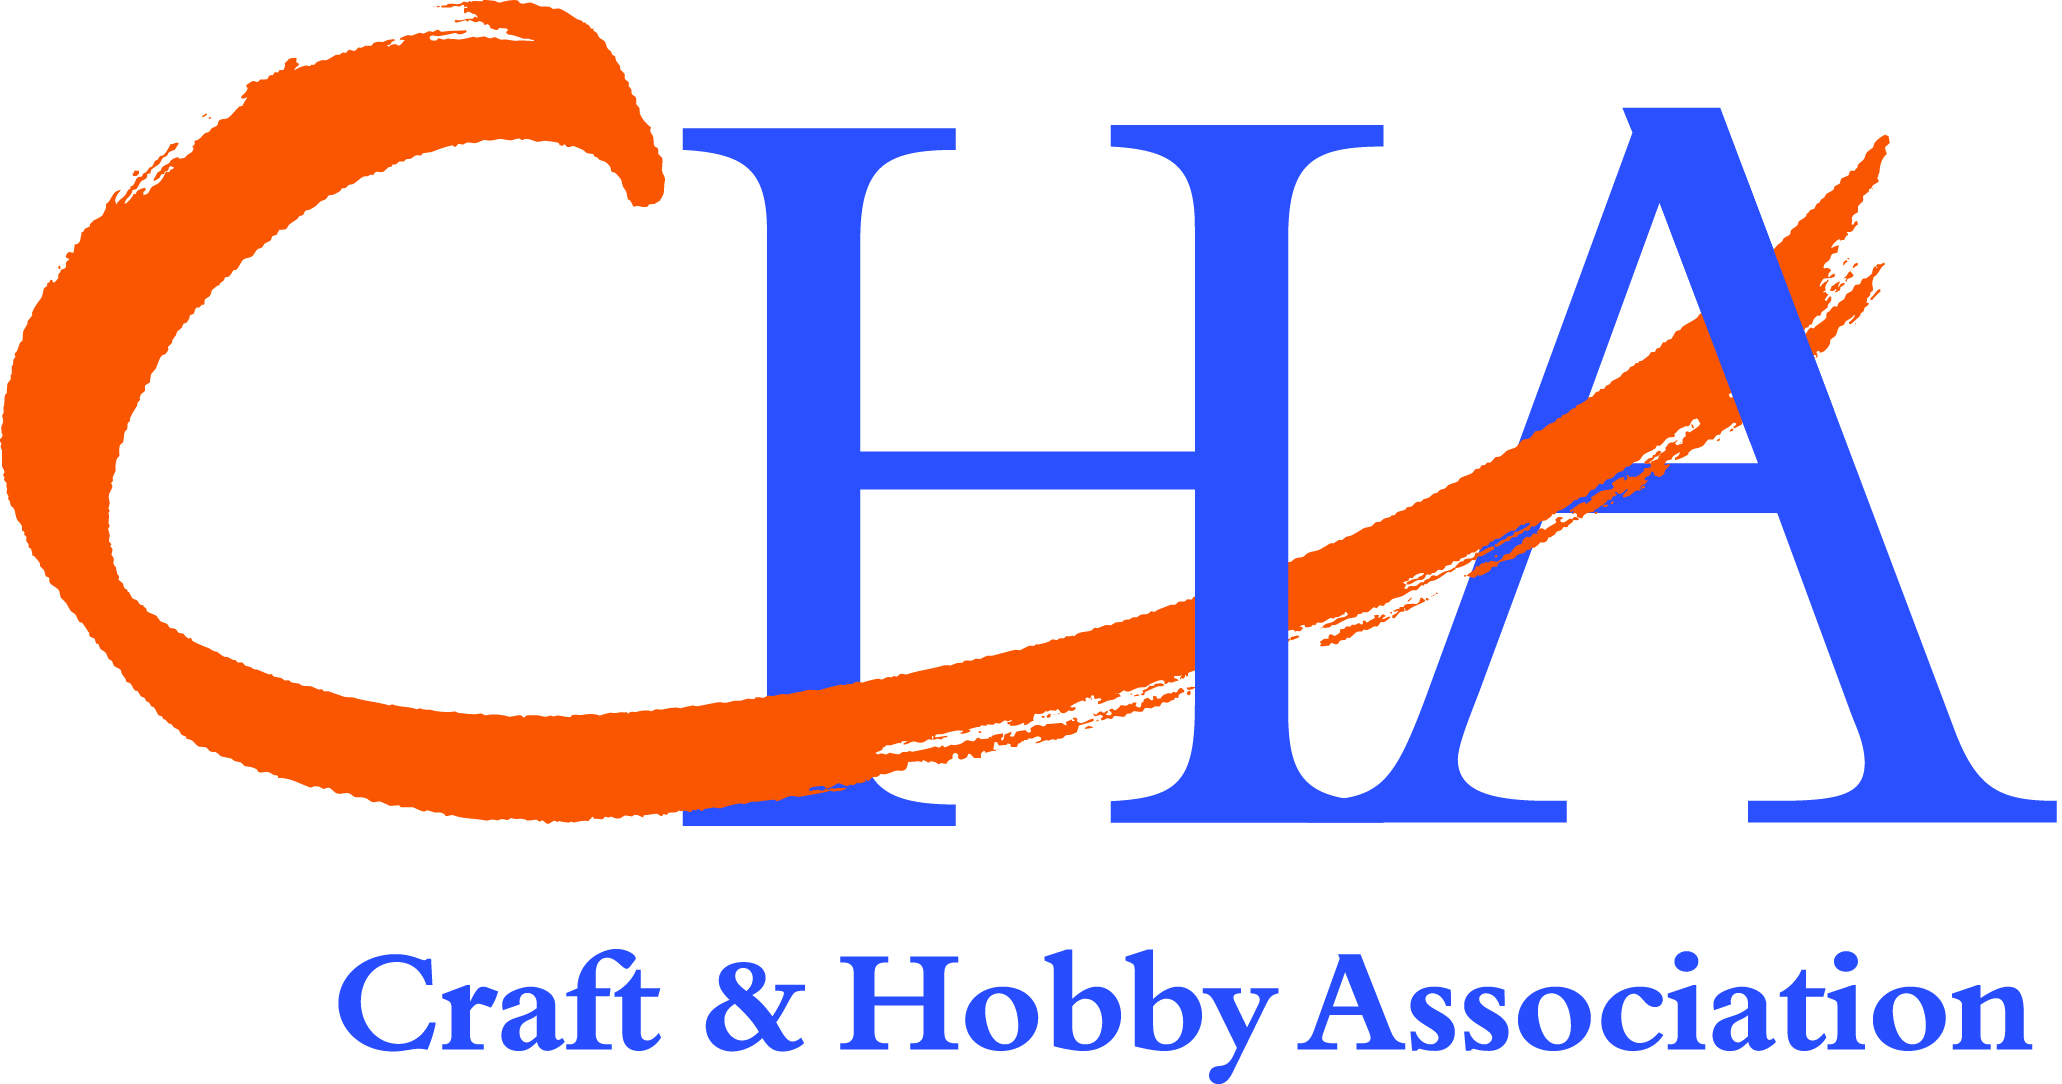 Craft & Hobby Association Launches New CHA MEGA Show Website